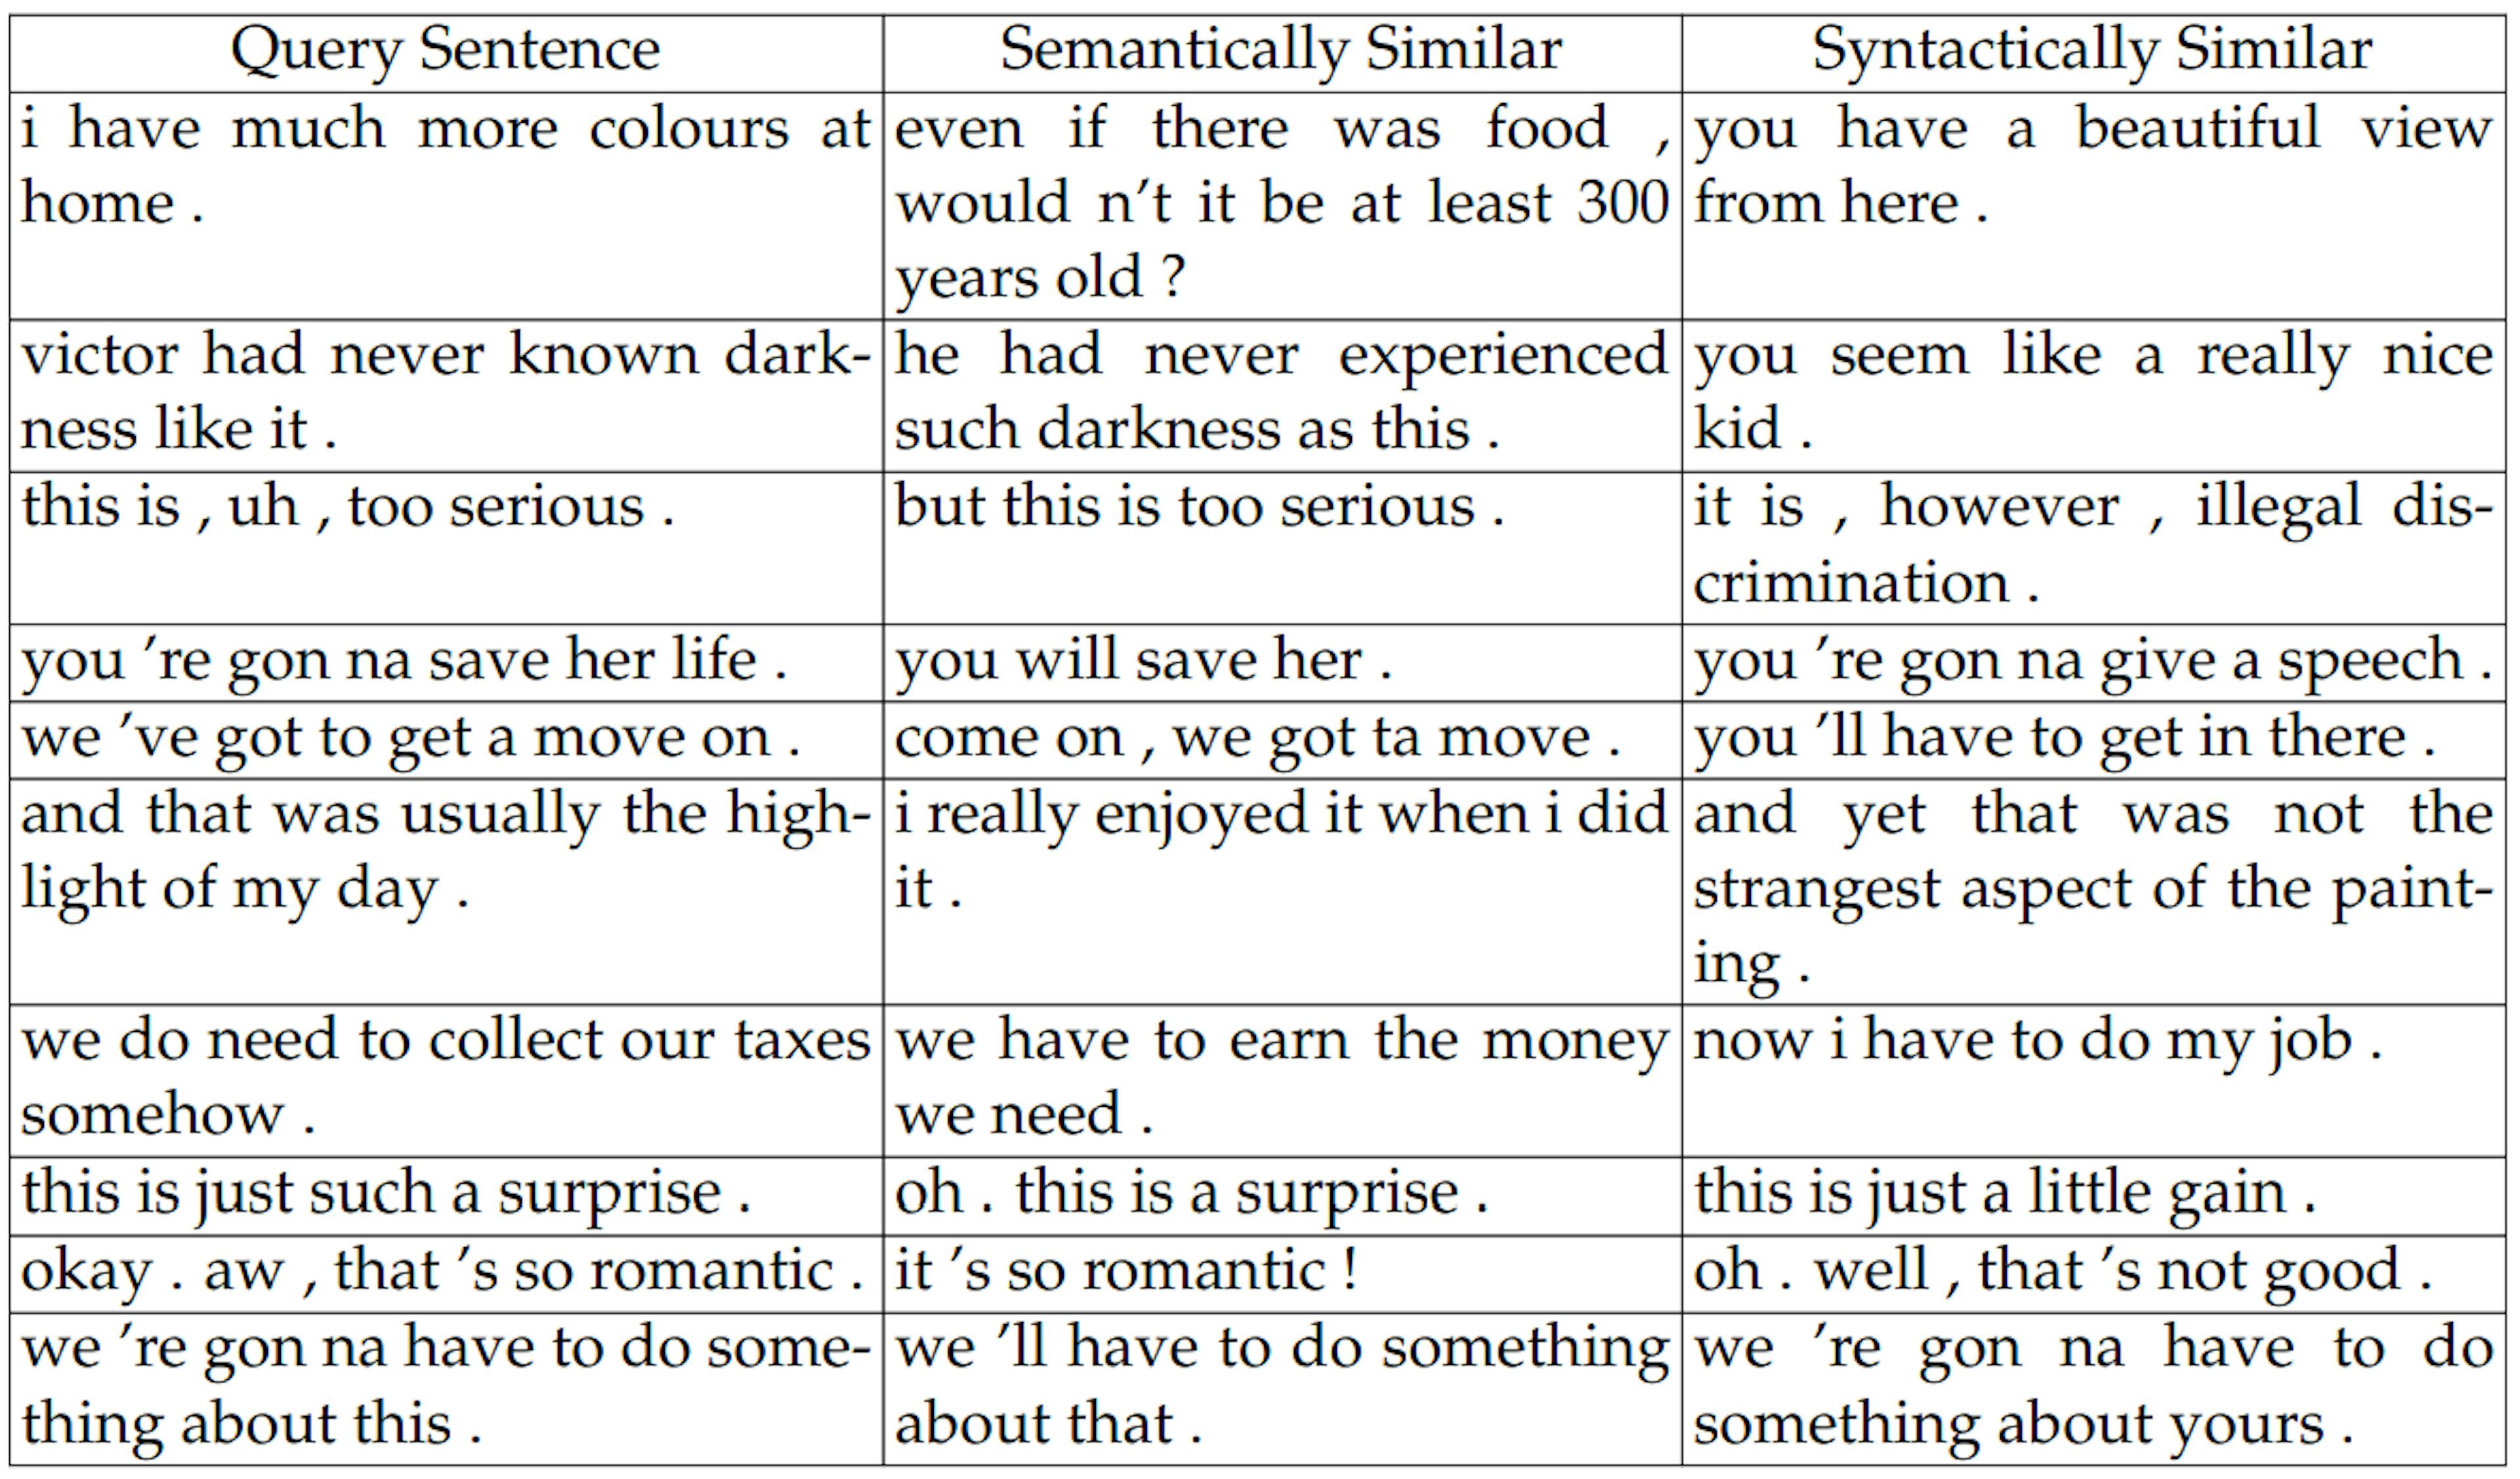 Table 5.4: Examples of most similar sentences to particular query sentences in terms of the semantic variable or the syntactic variable.